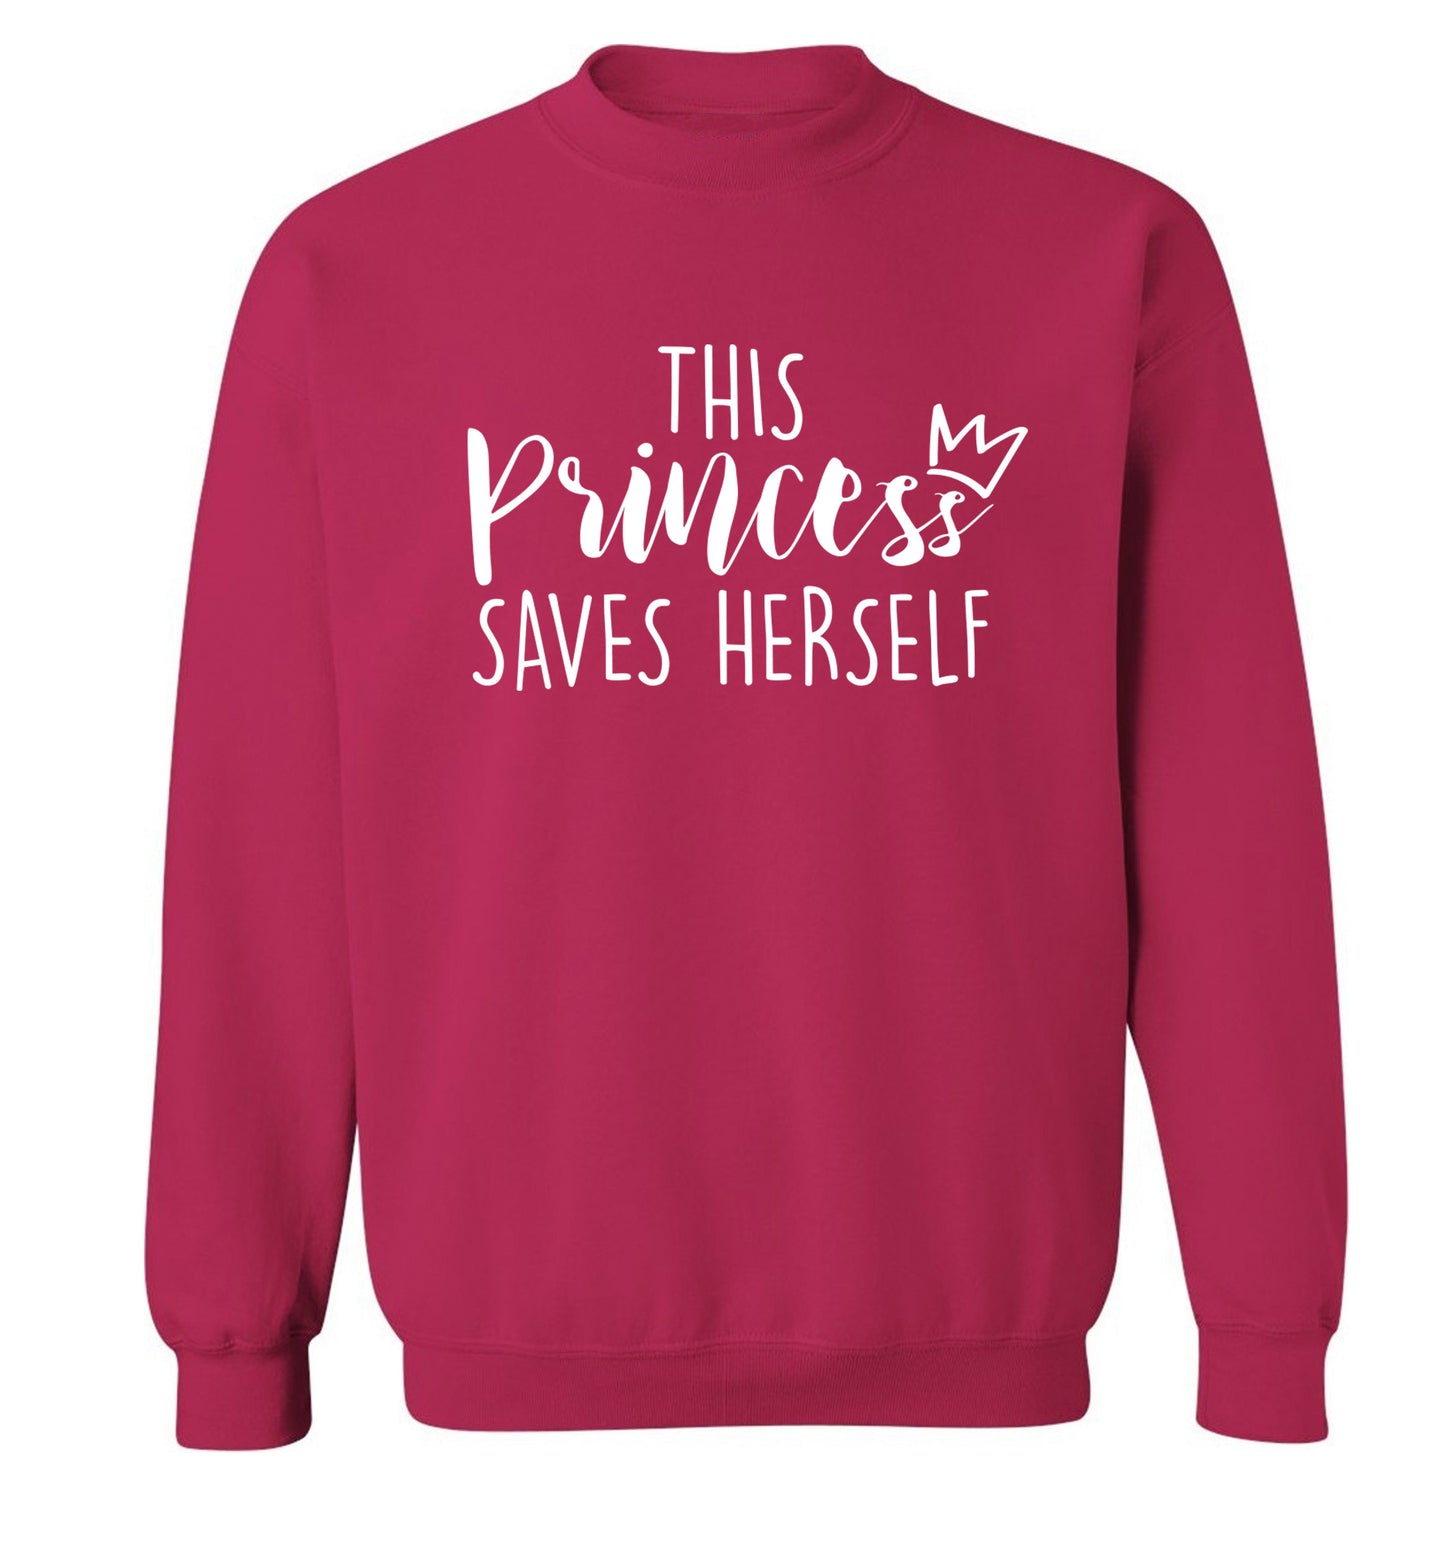 This princess saves herself Adult's unisex pink Sweater 2XL